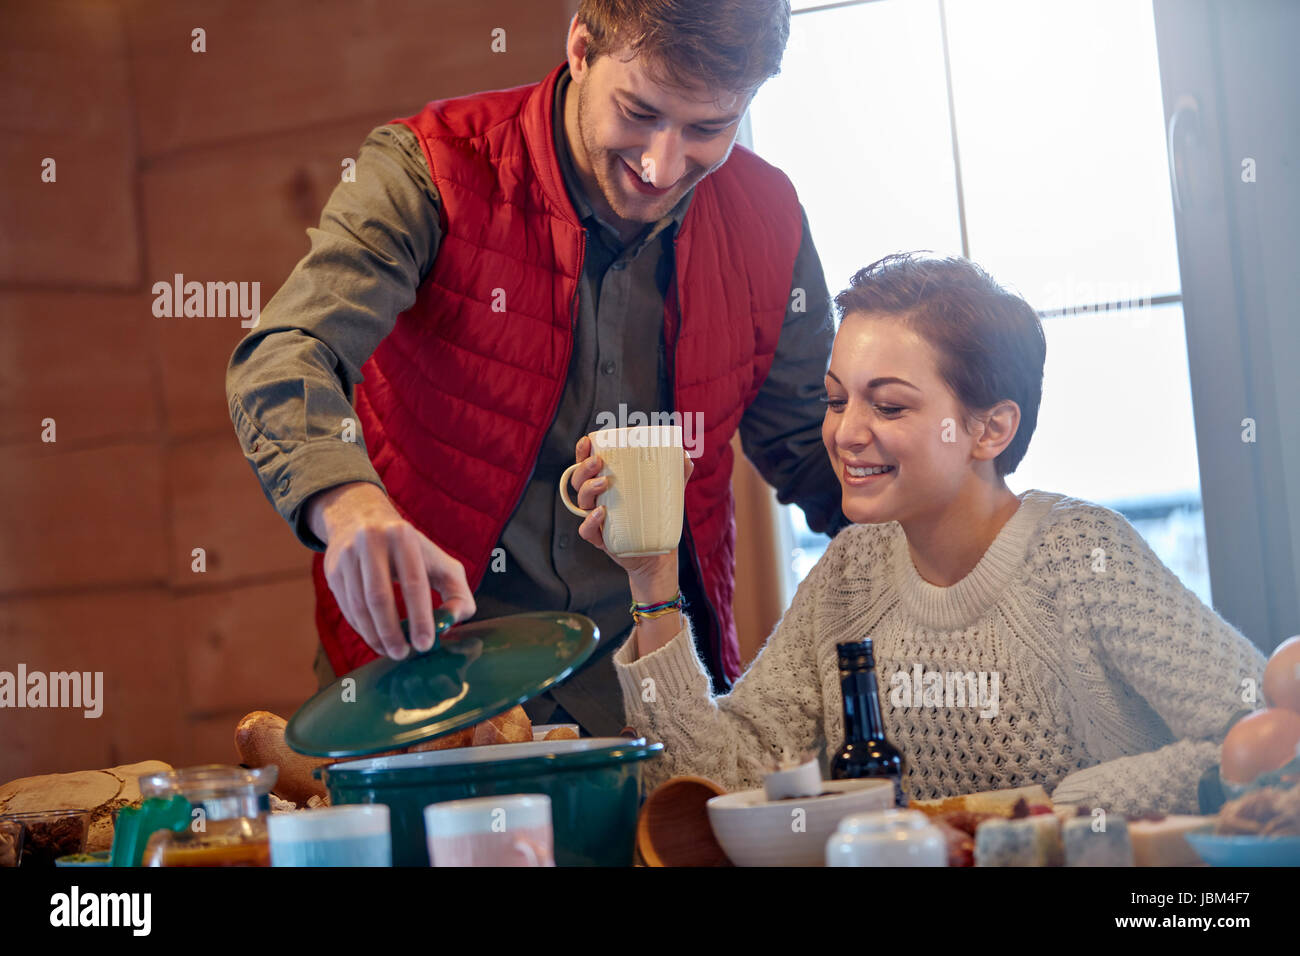 Couple cooking and drinking at cabin table Stock Photo